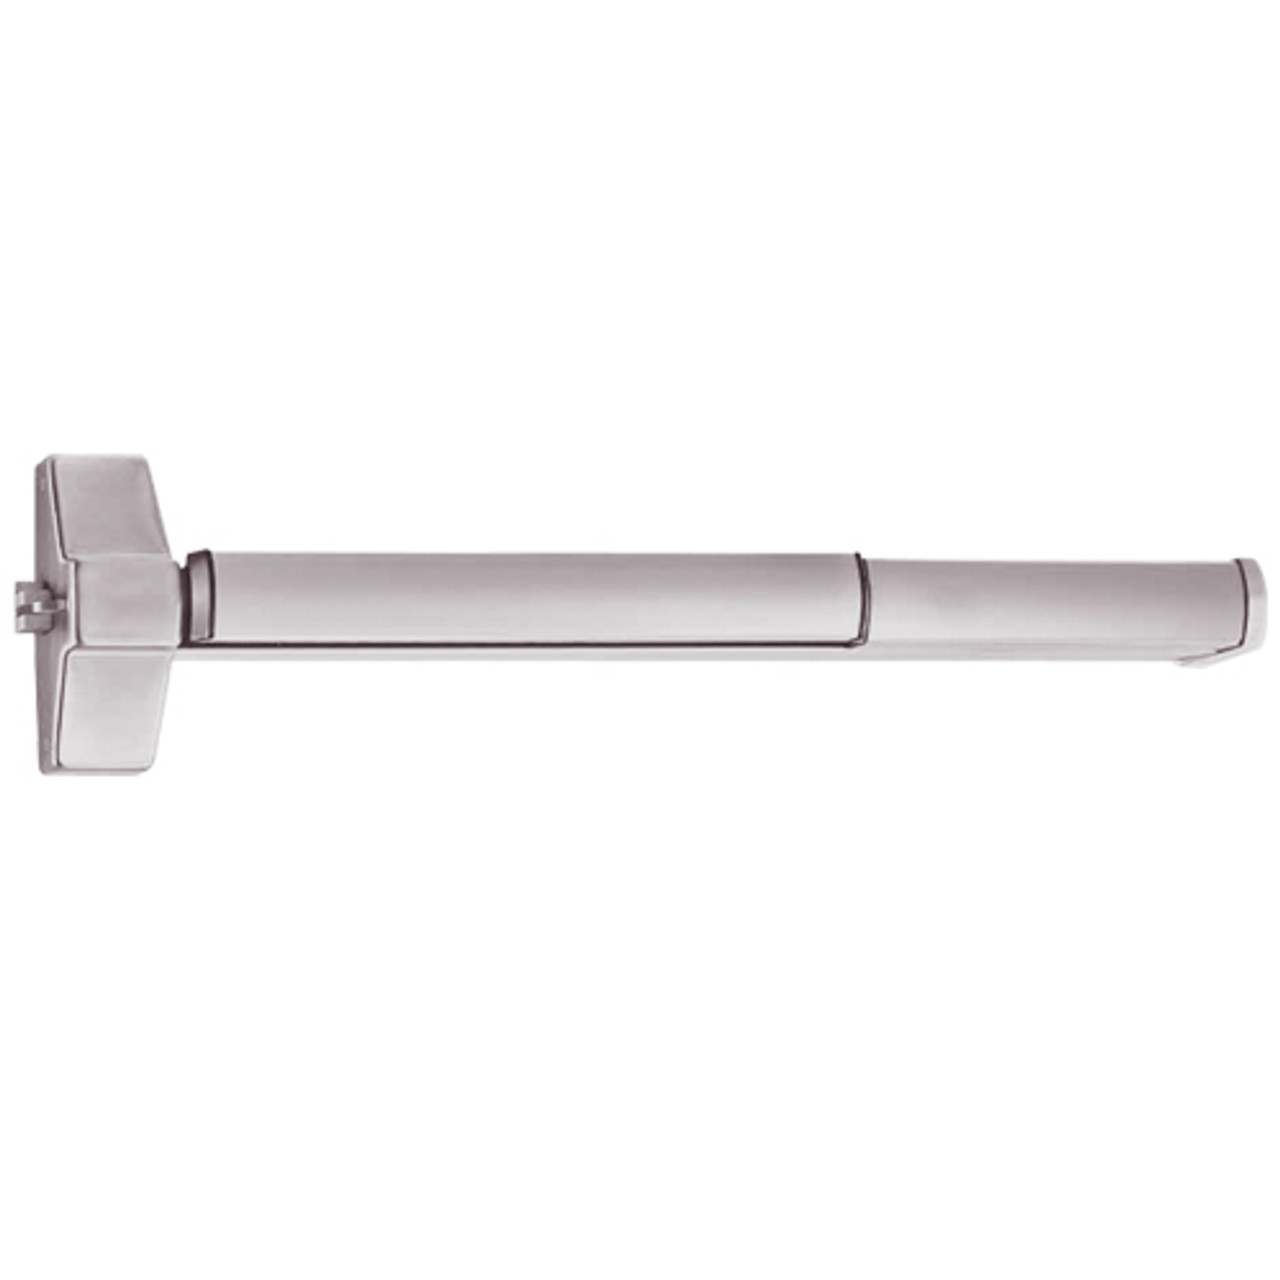 ED5200SA-630-W048-M61 Corbin ED5200 Series Fire Rated Exit Device with Exit Alarm Device in Satin Stainless Steel Finish